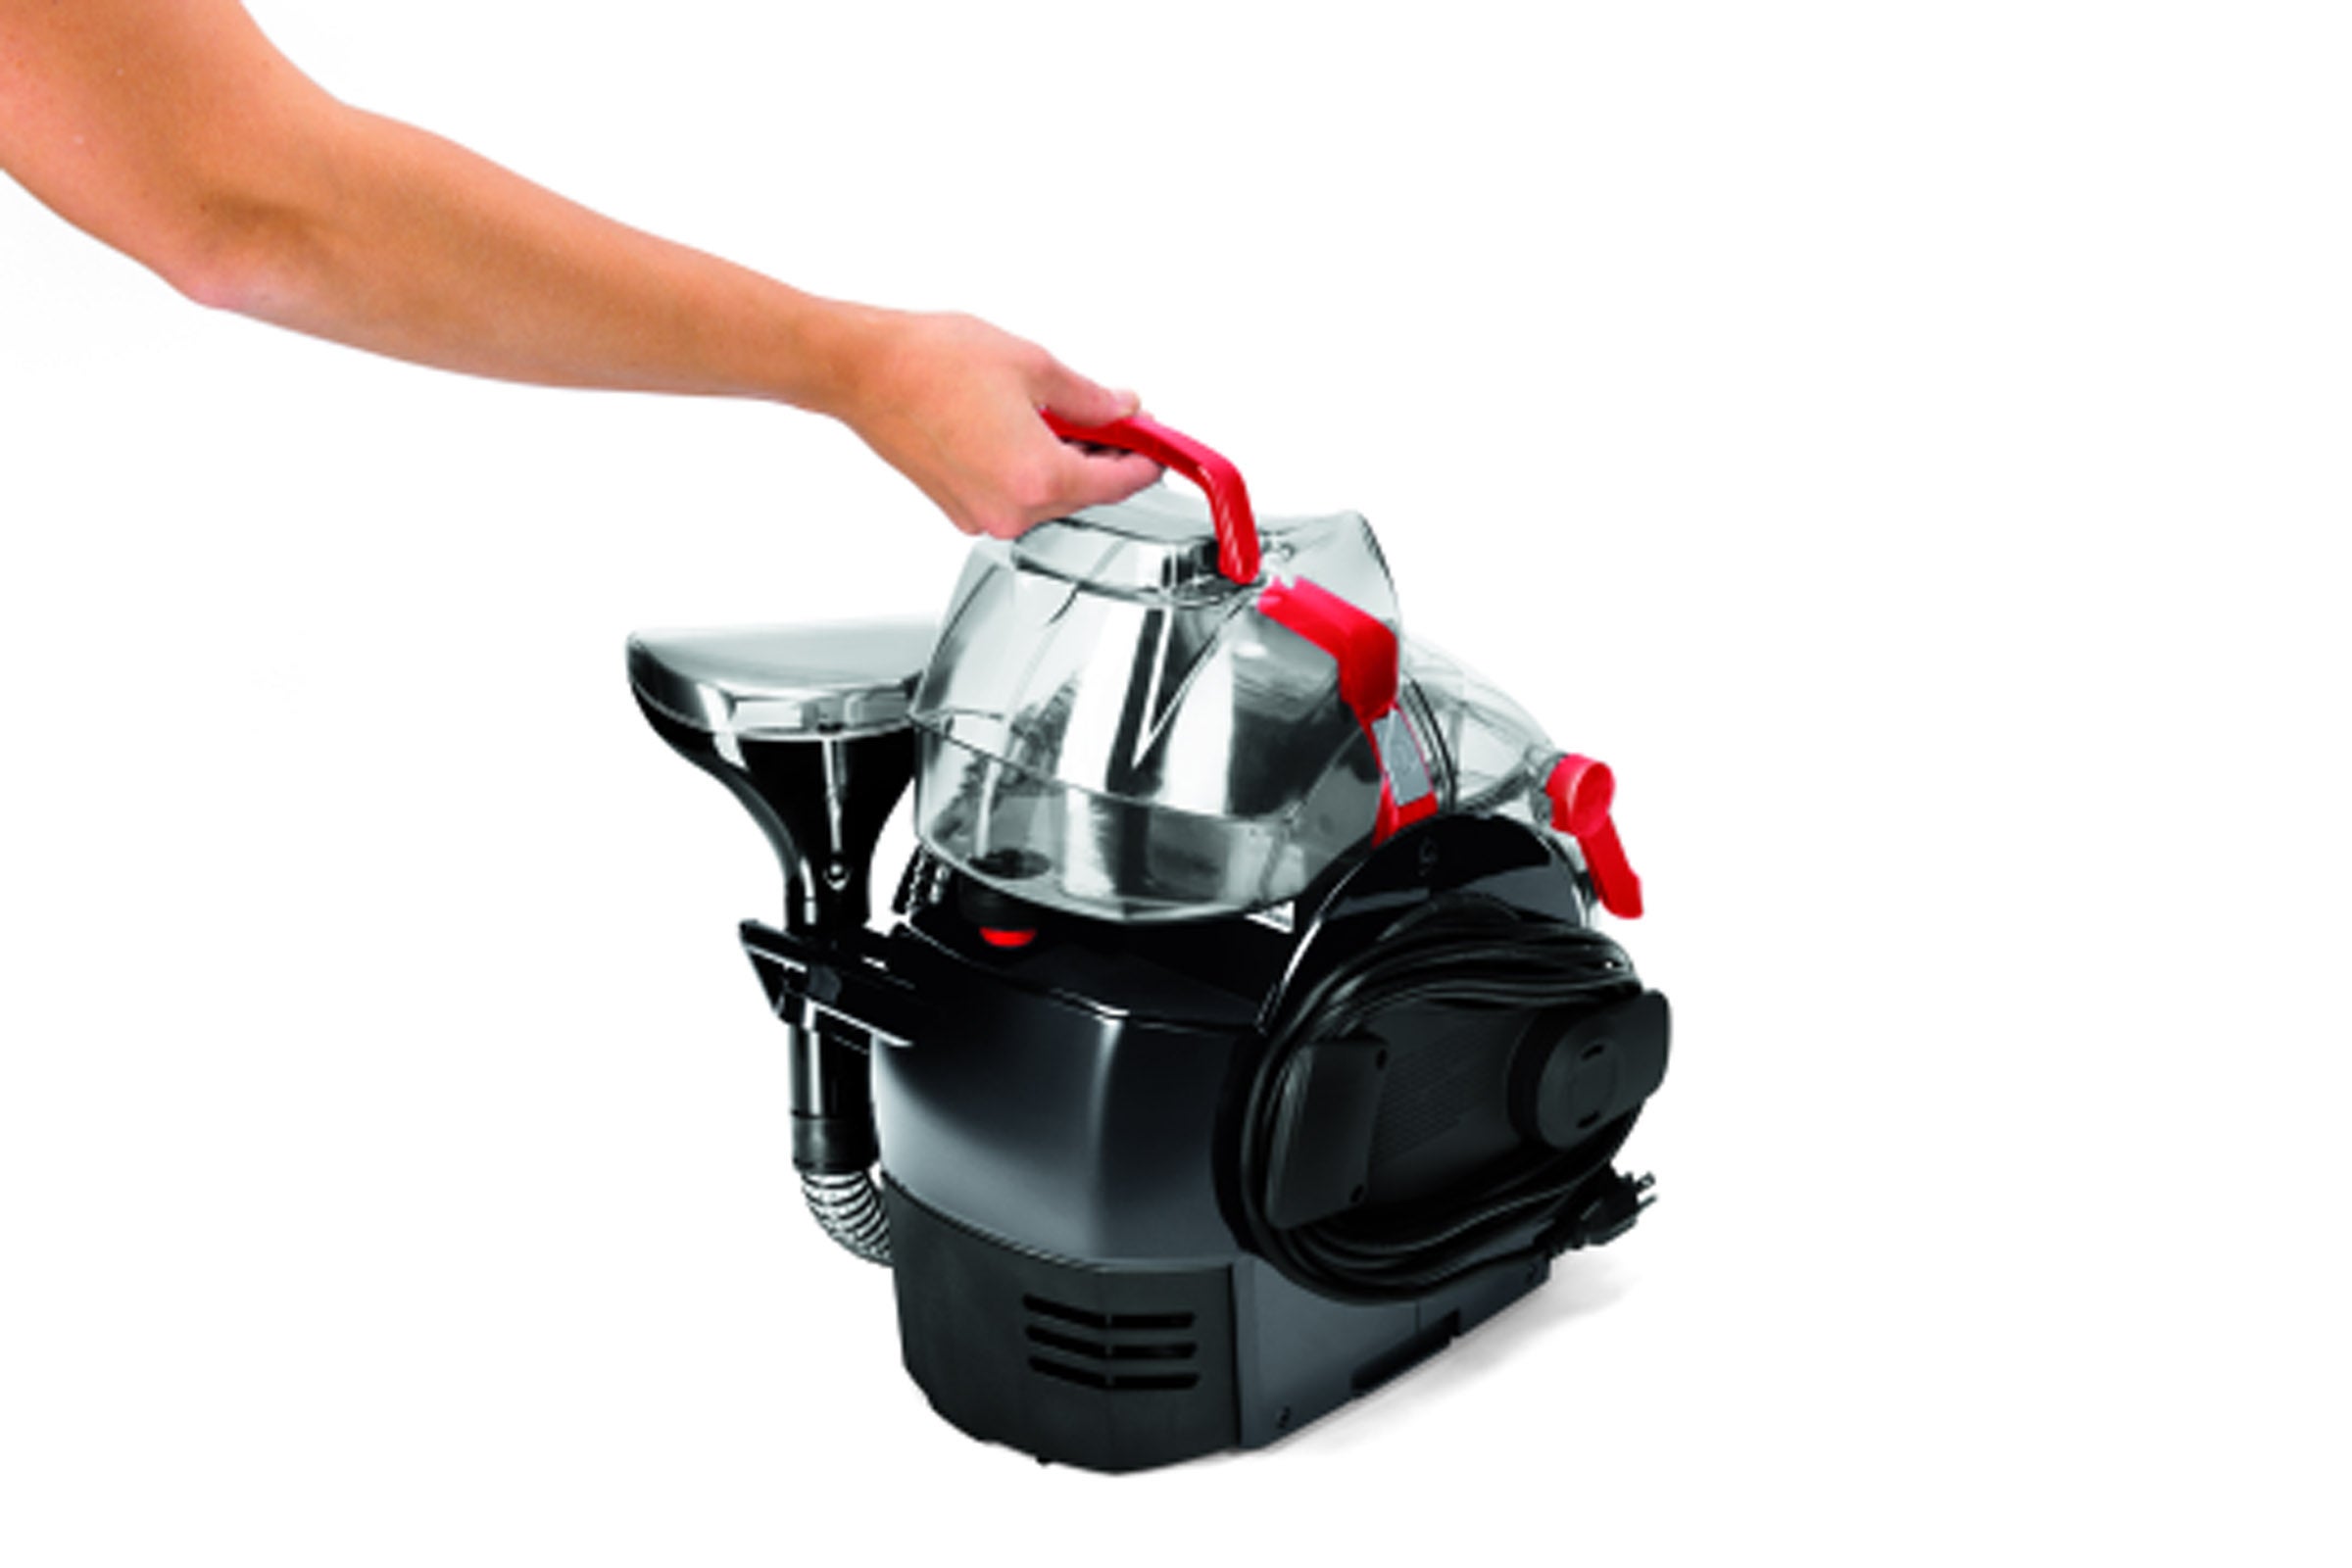 The Bissell SpotClean Pro, with tools and hose stowed